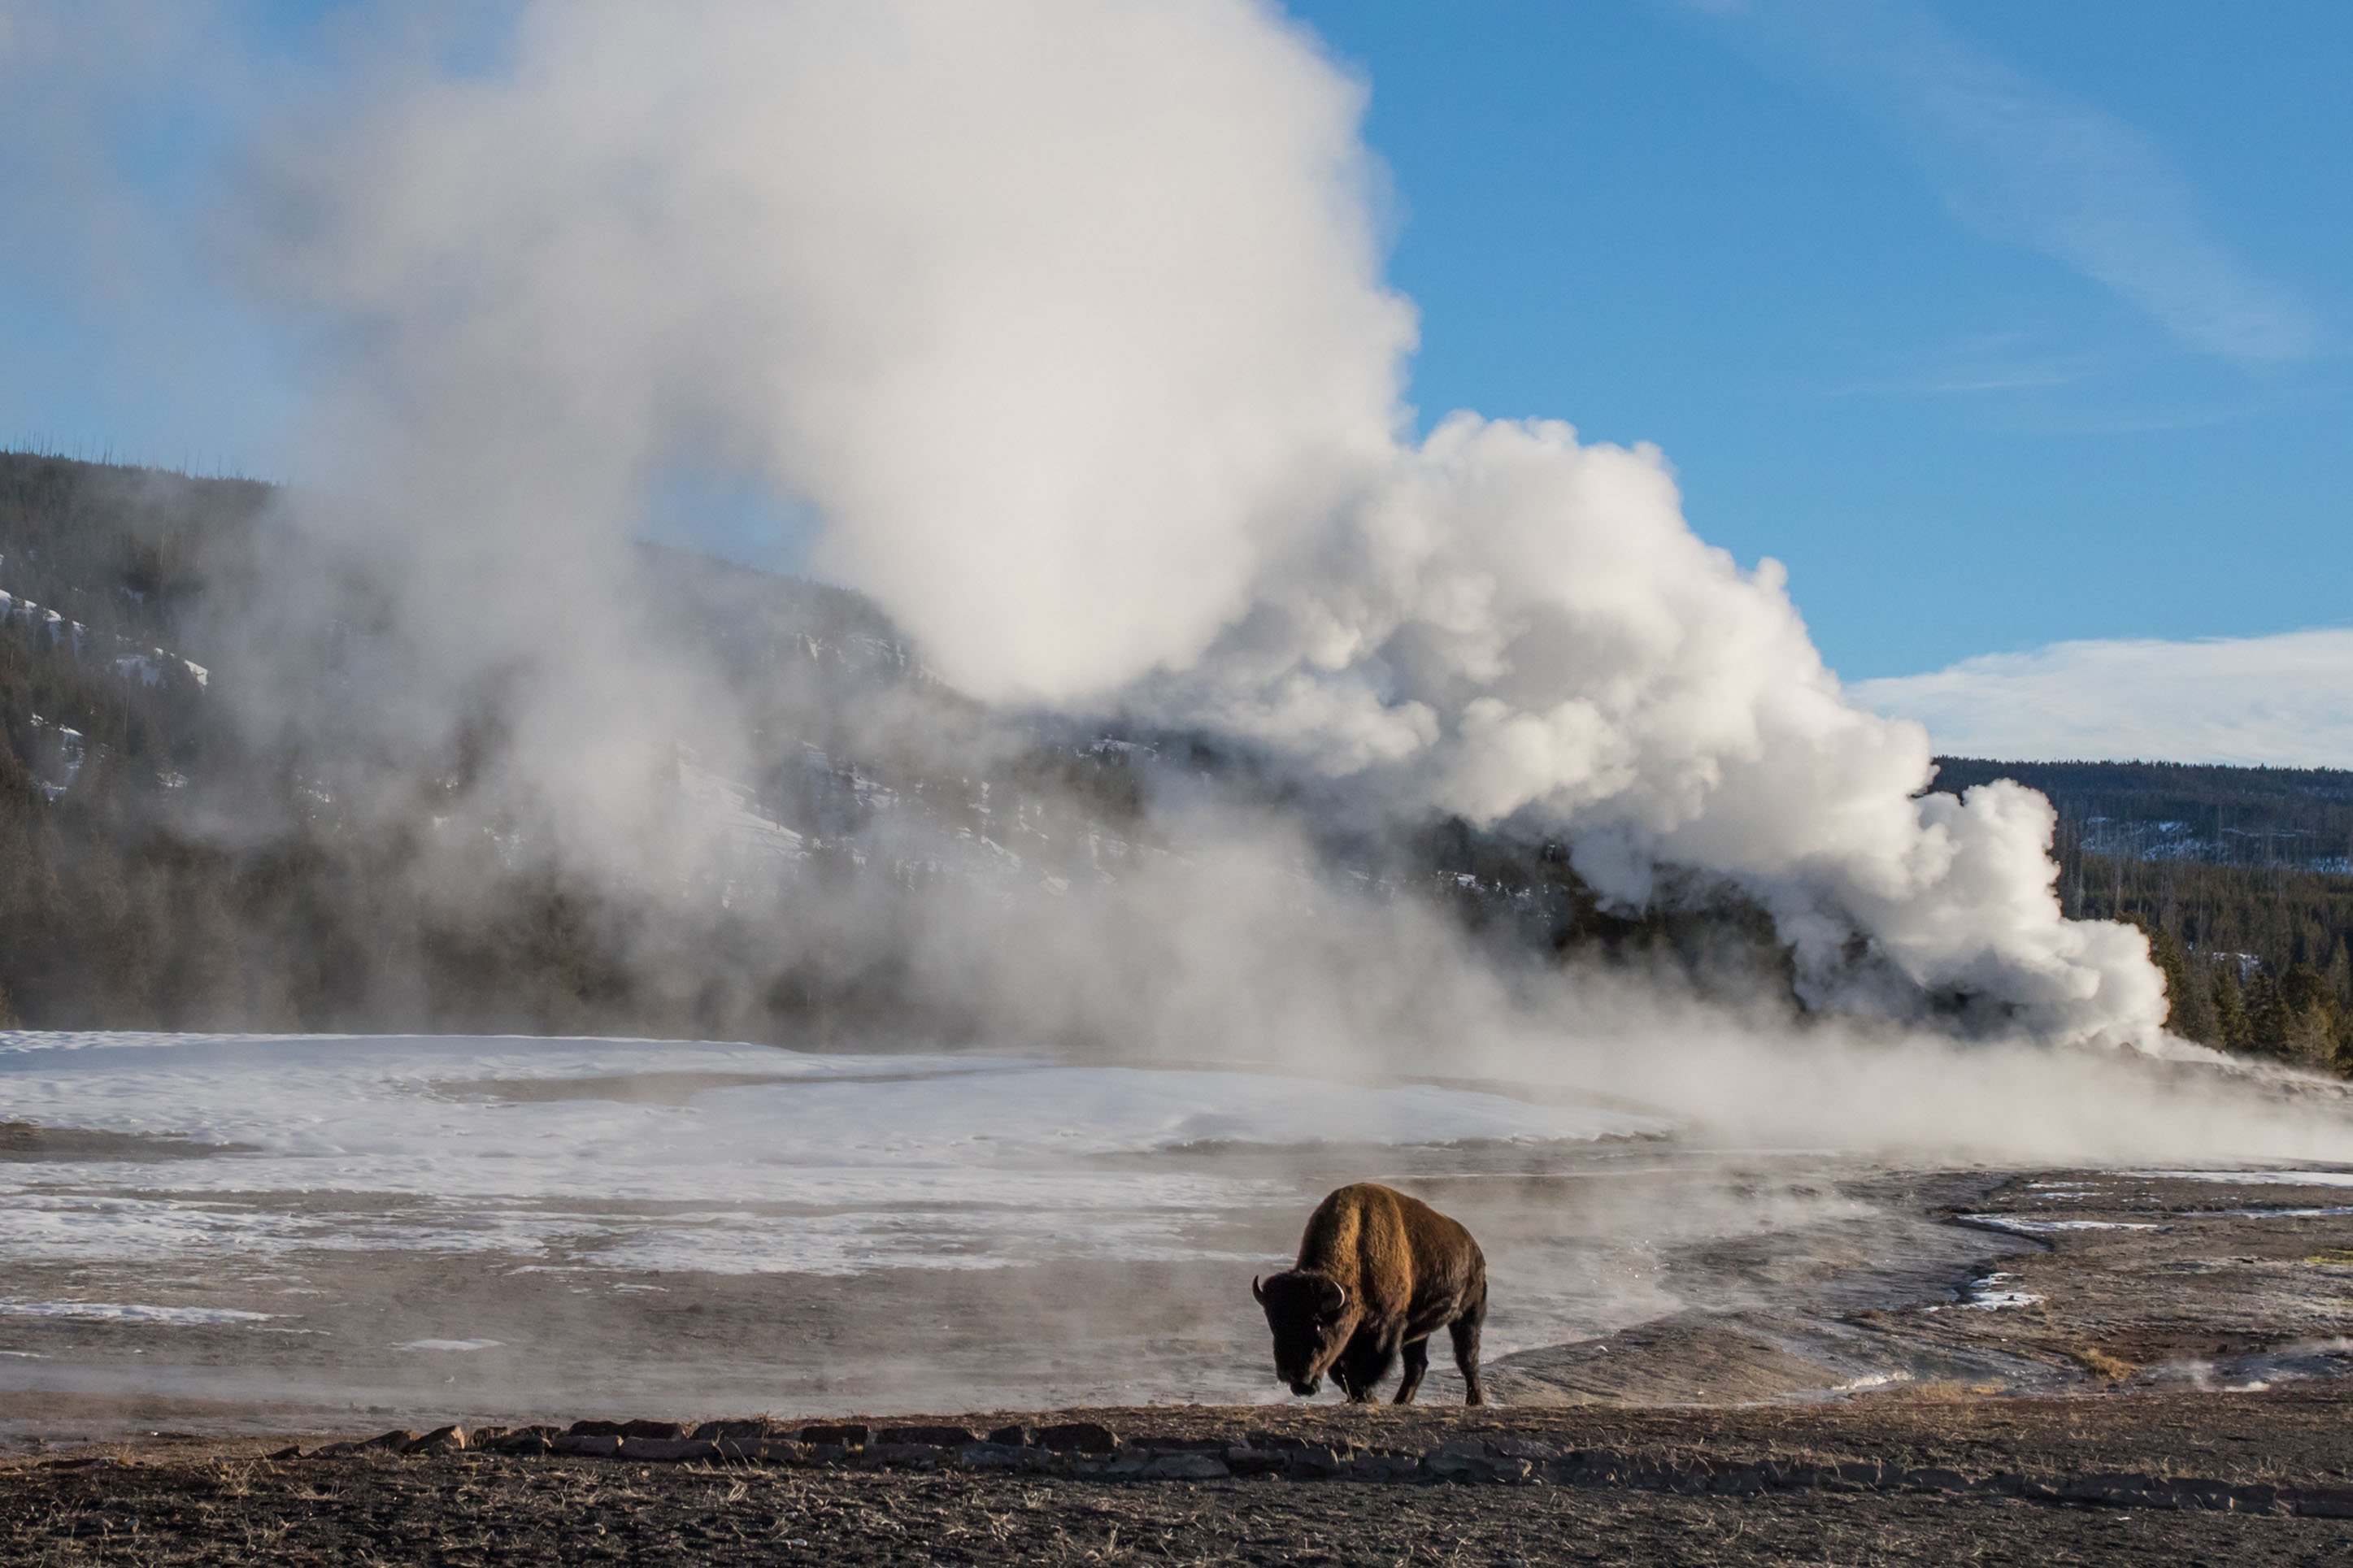 Bison and geyser in Yellowstone National Park